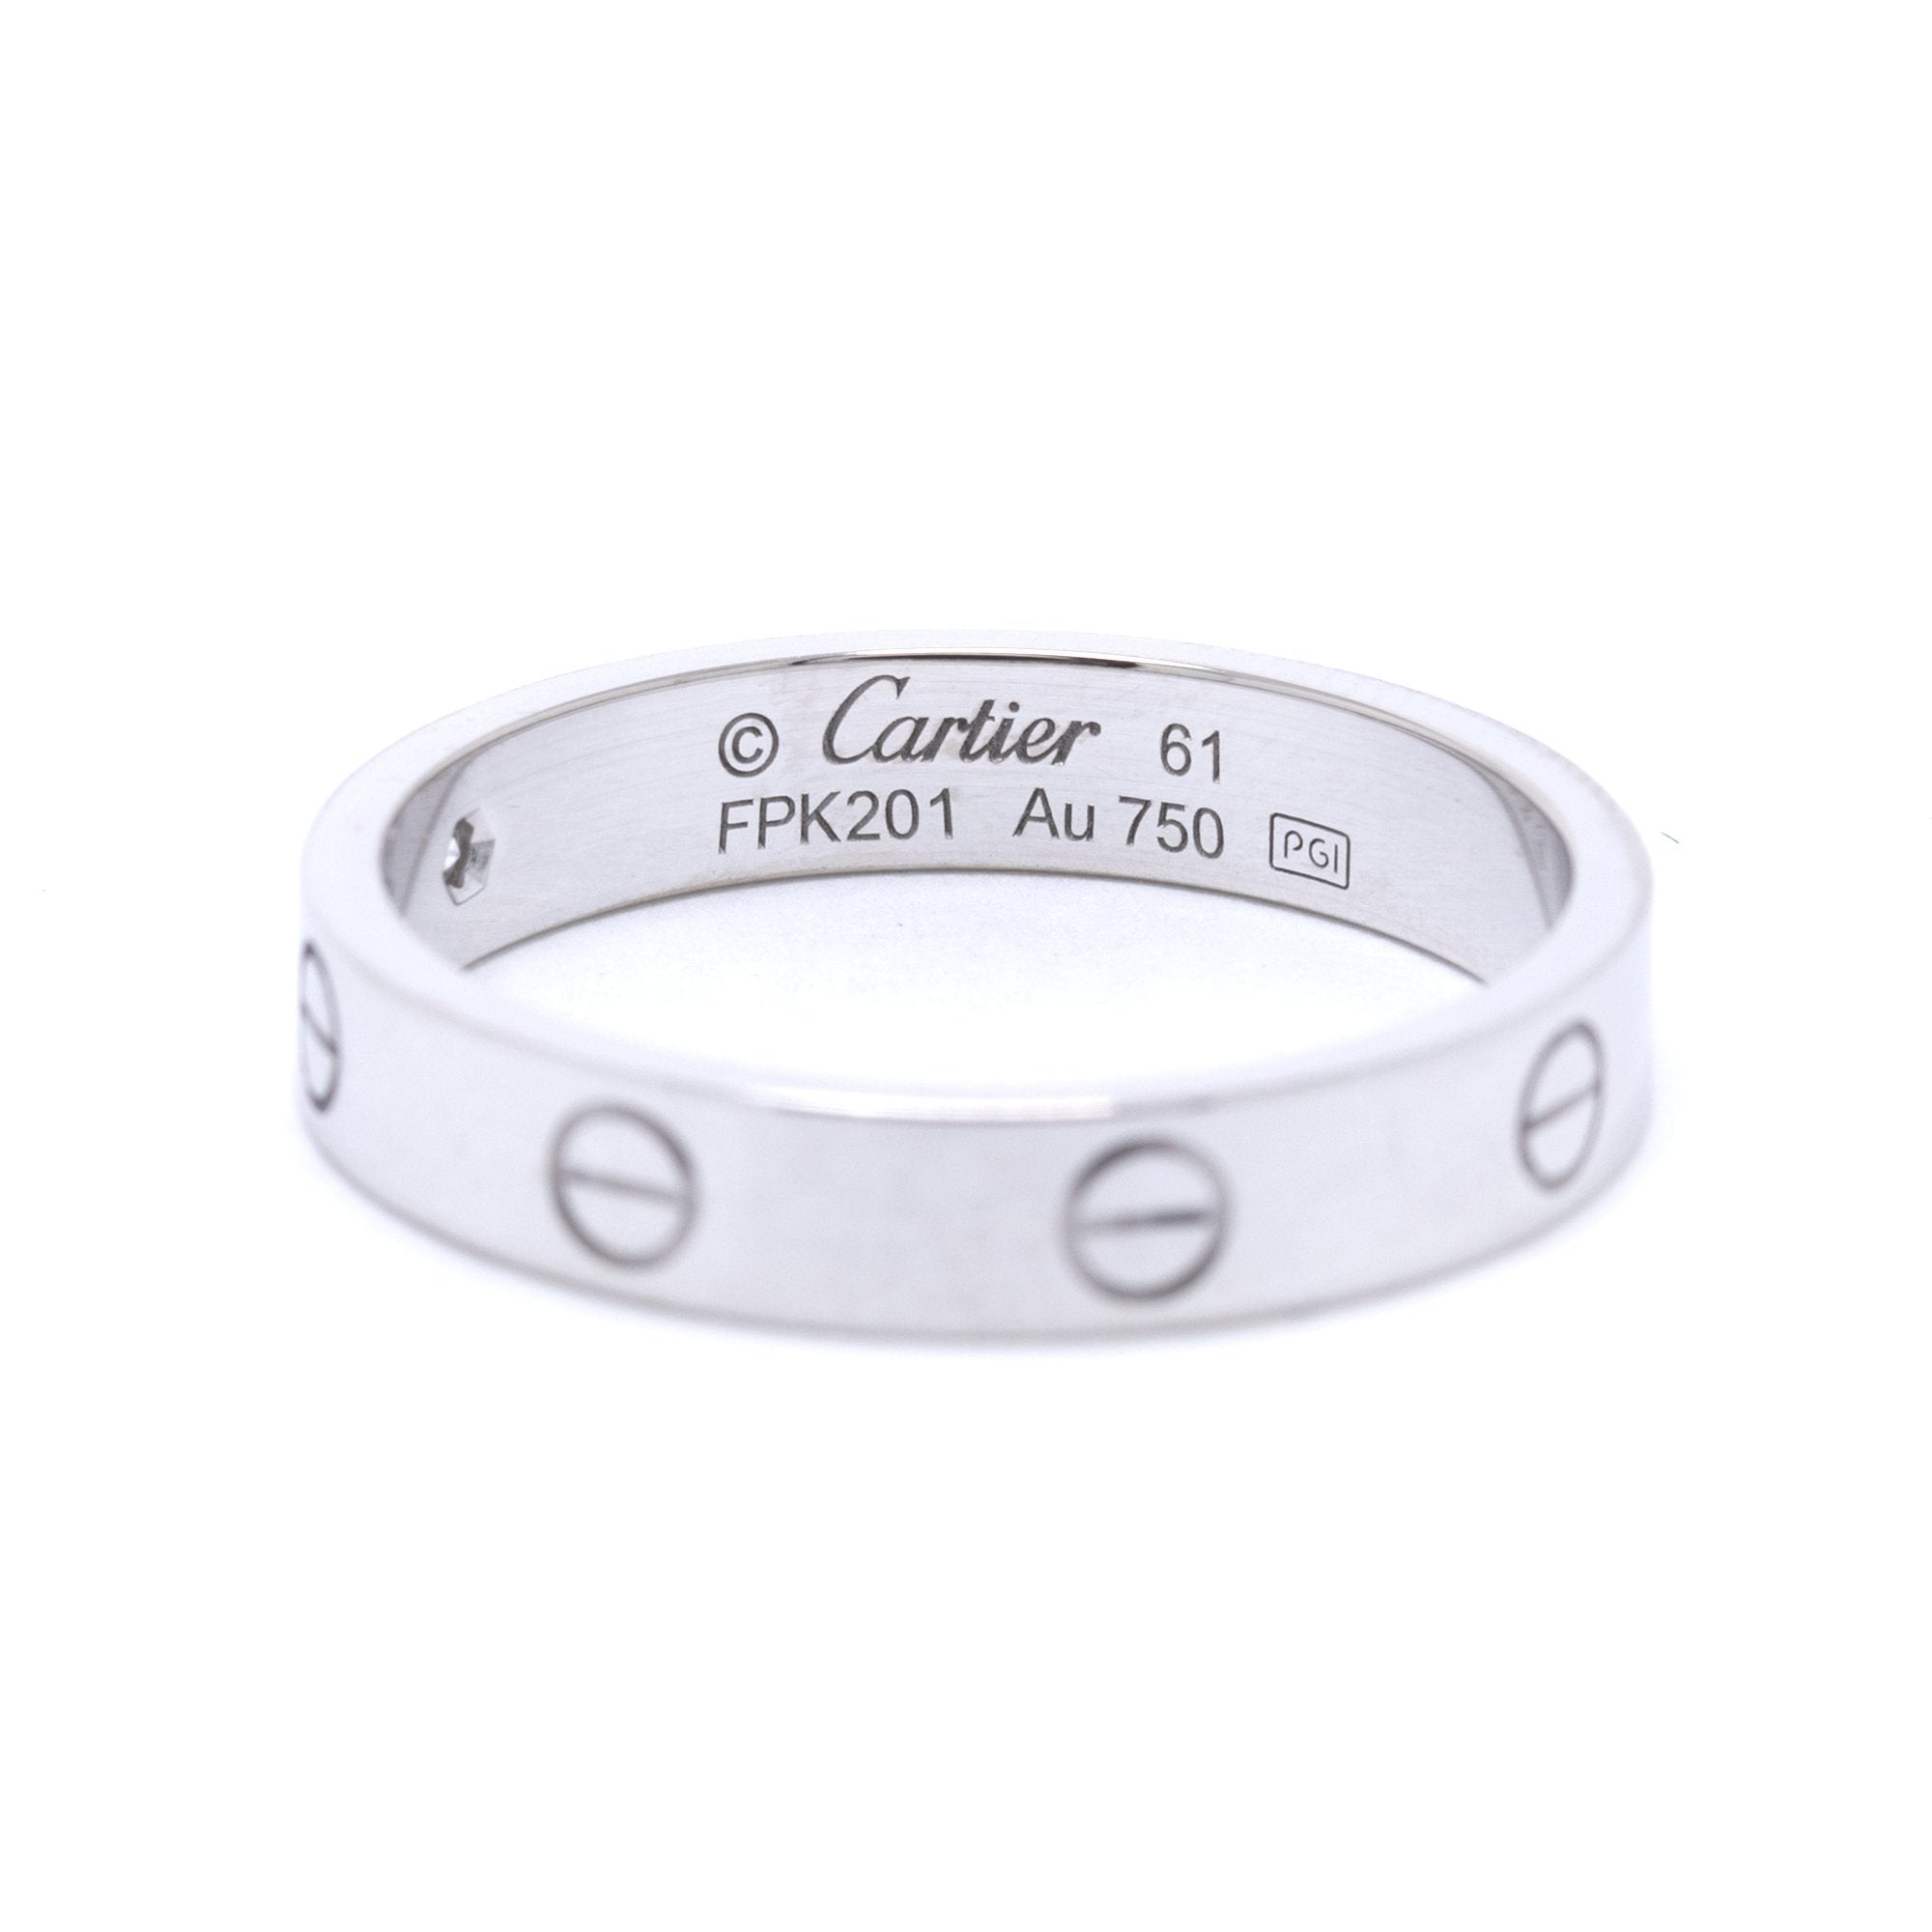 Cartier 18k White Gold Love Wedding Band Ring With Diamond Rings Cartier 356978 ?v=1564288475